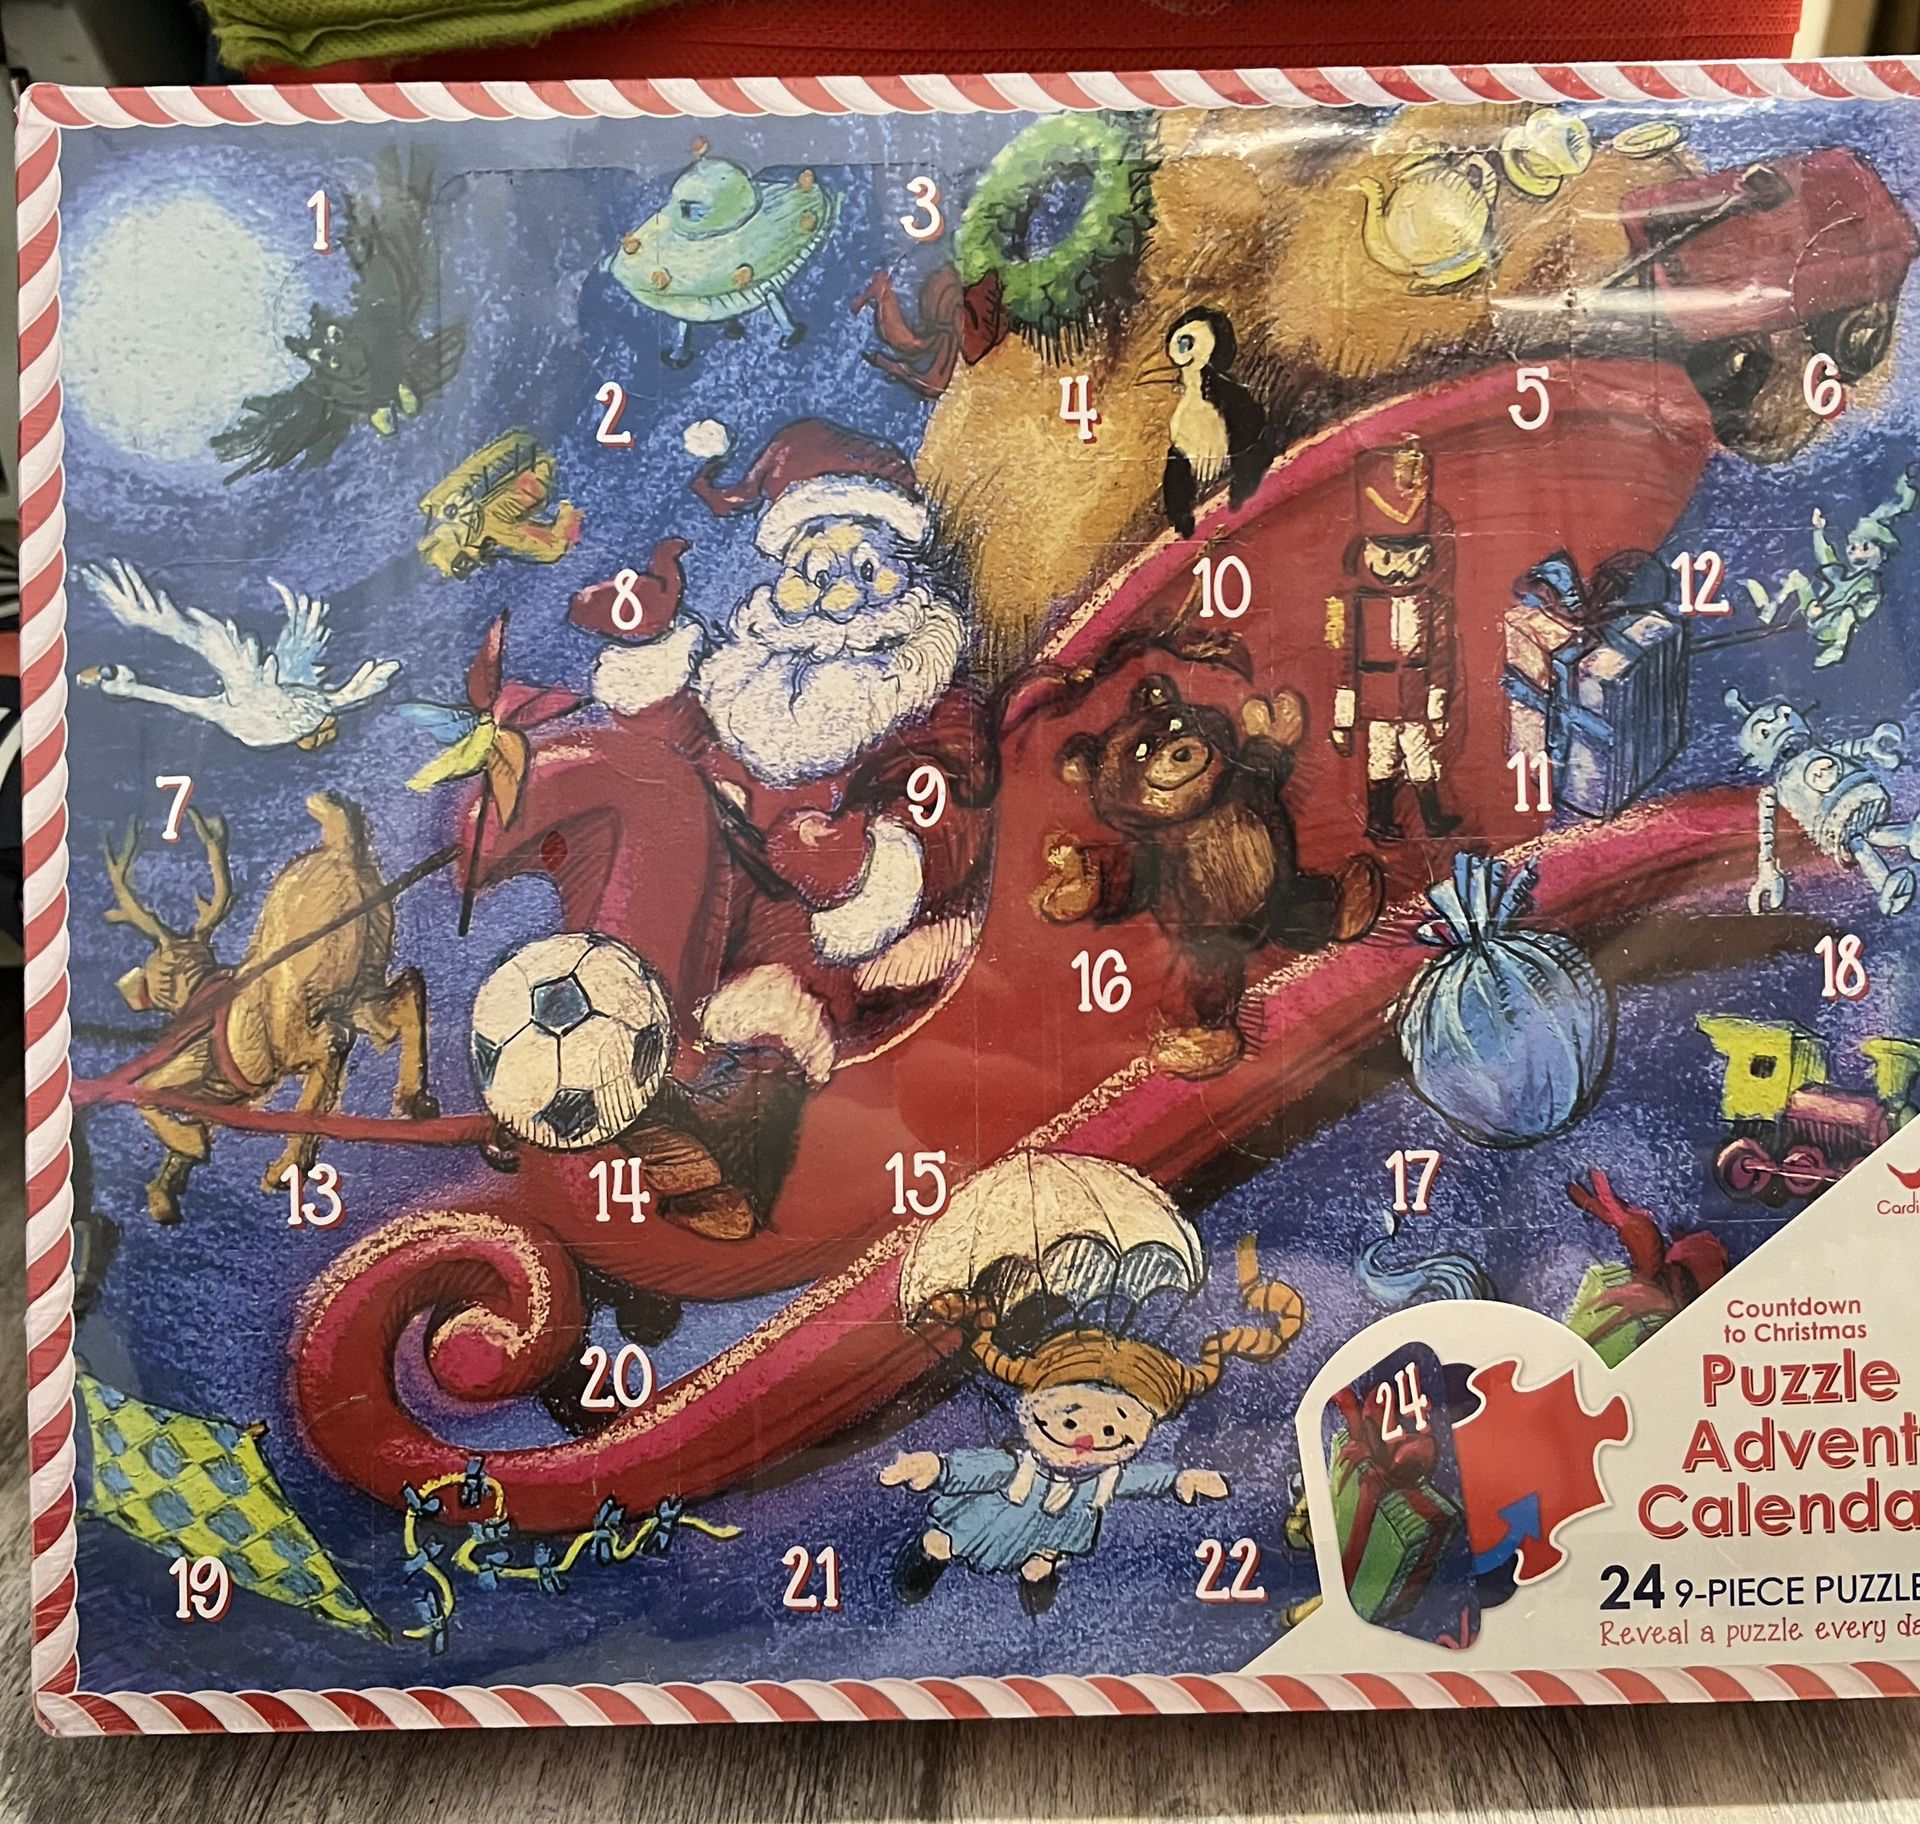 Countdown to Christmas Puzzle Advent Calendar